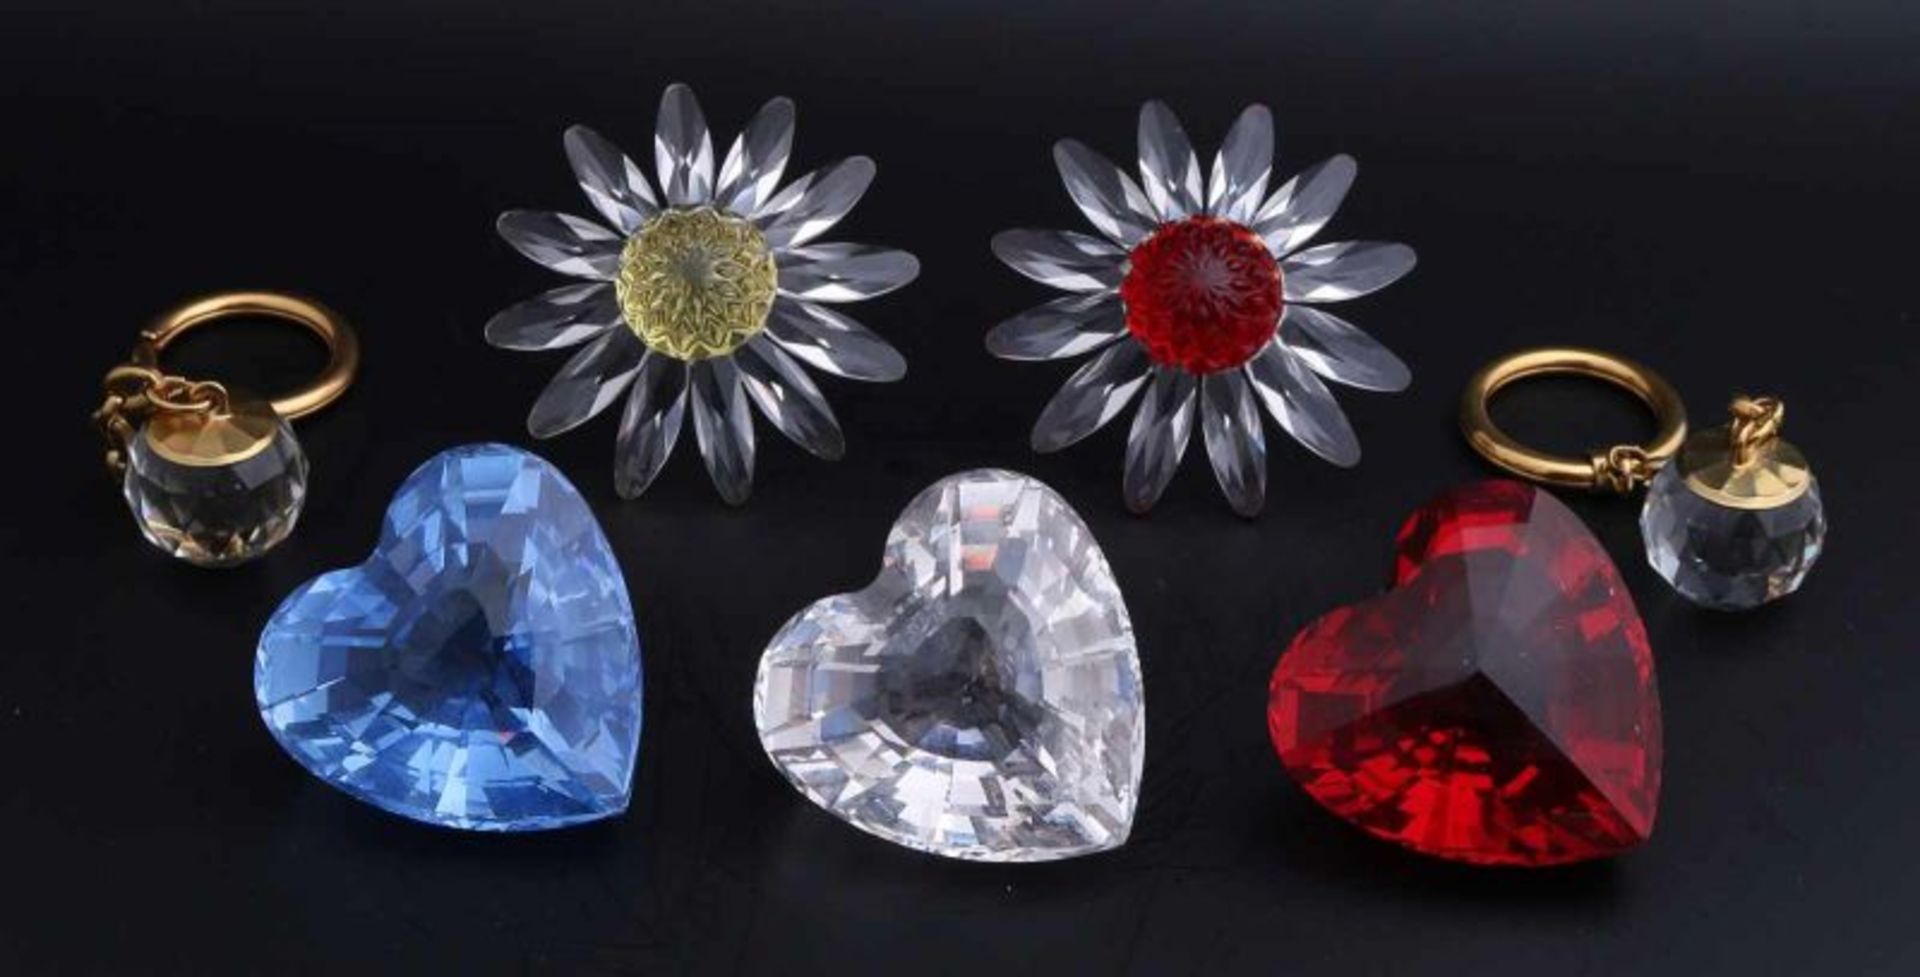 Lot 5 parts including 3 Swarovski crystal hearts in bright red and blue crystal approximately